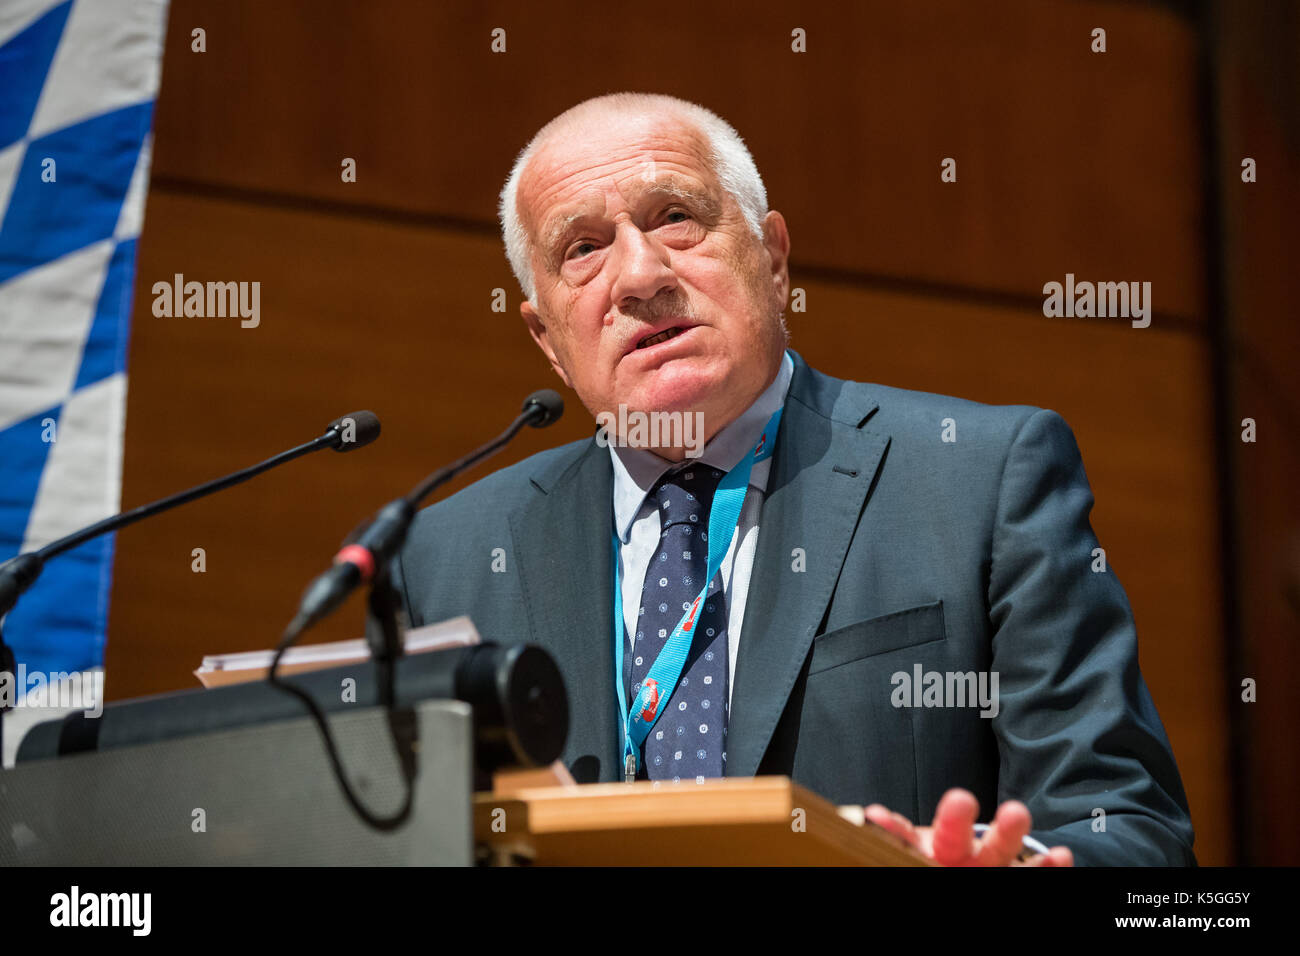 Nuremberg, Germany. 9th Sep, 2017. Former Czech president and prime minister Vaclav Klaus attends an election event of the Bavarian section of the right-wing nationalist party Alternative for Germany in Nuremberg, Germany, 9 September 2017. Photo: Daniel Karmann/dpa/Alamy Live News Stock Photo